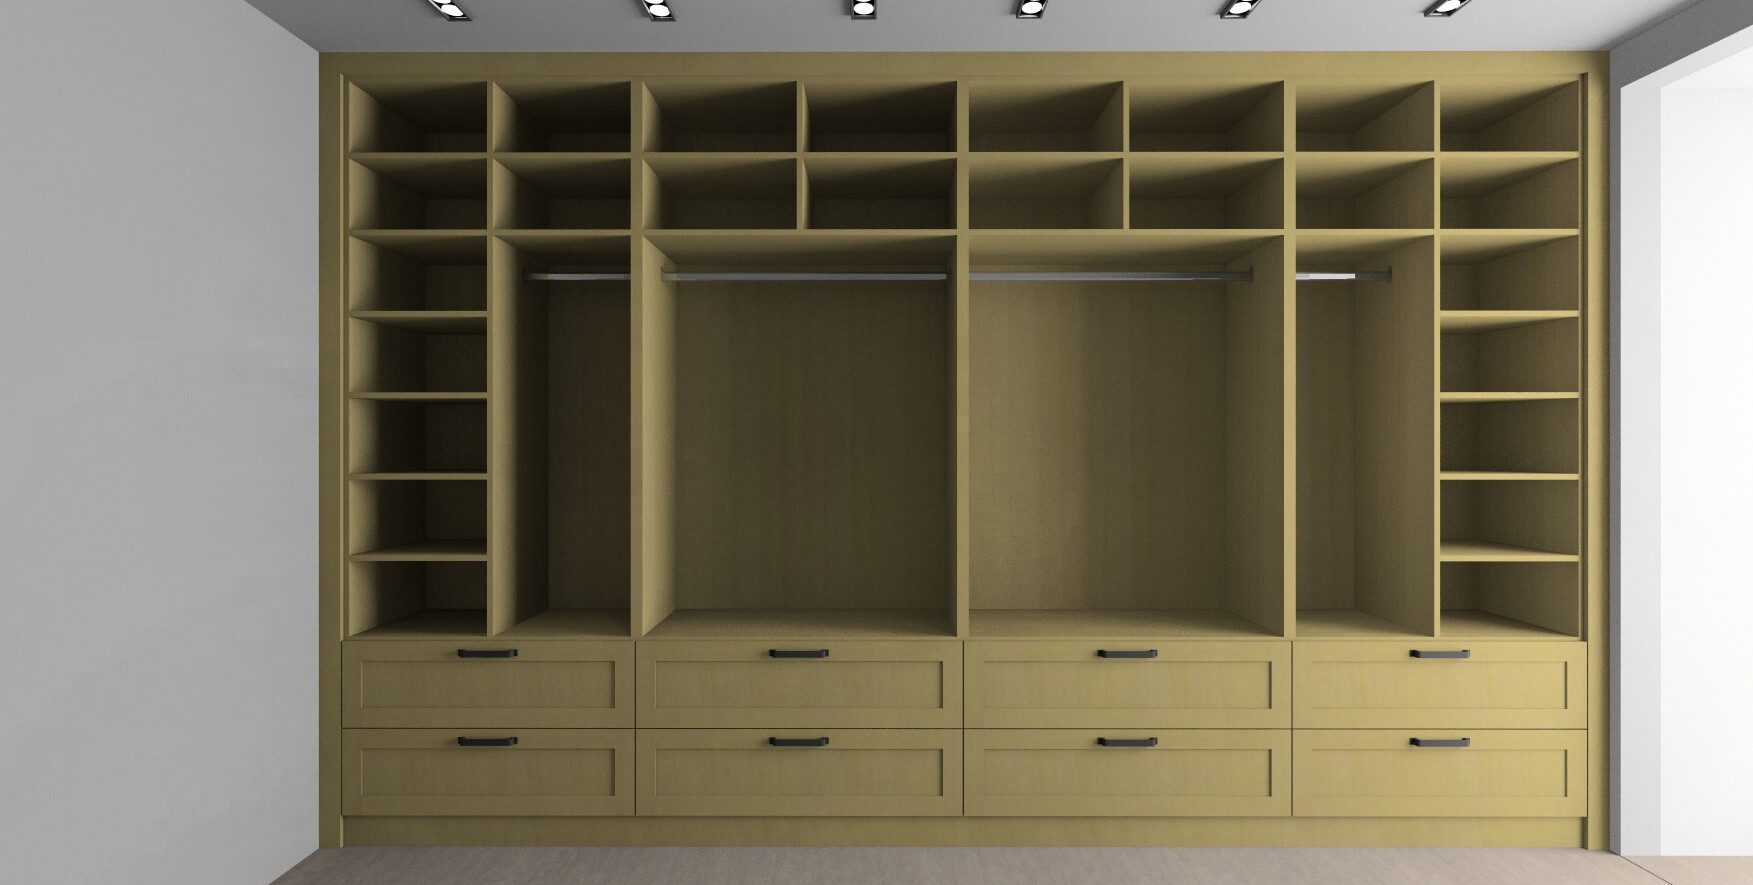 The design of the fitted wardrobe